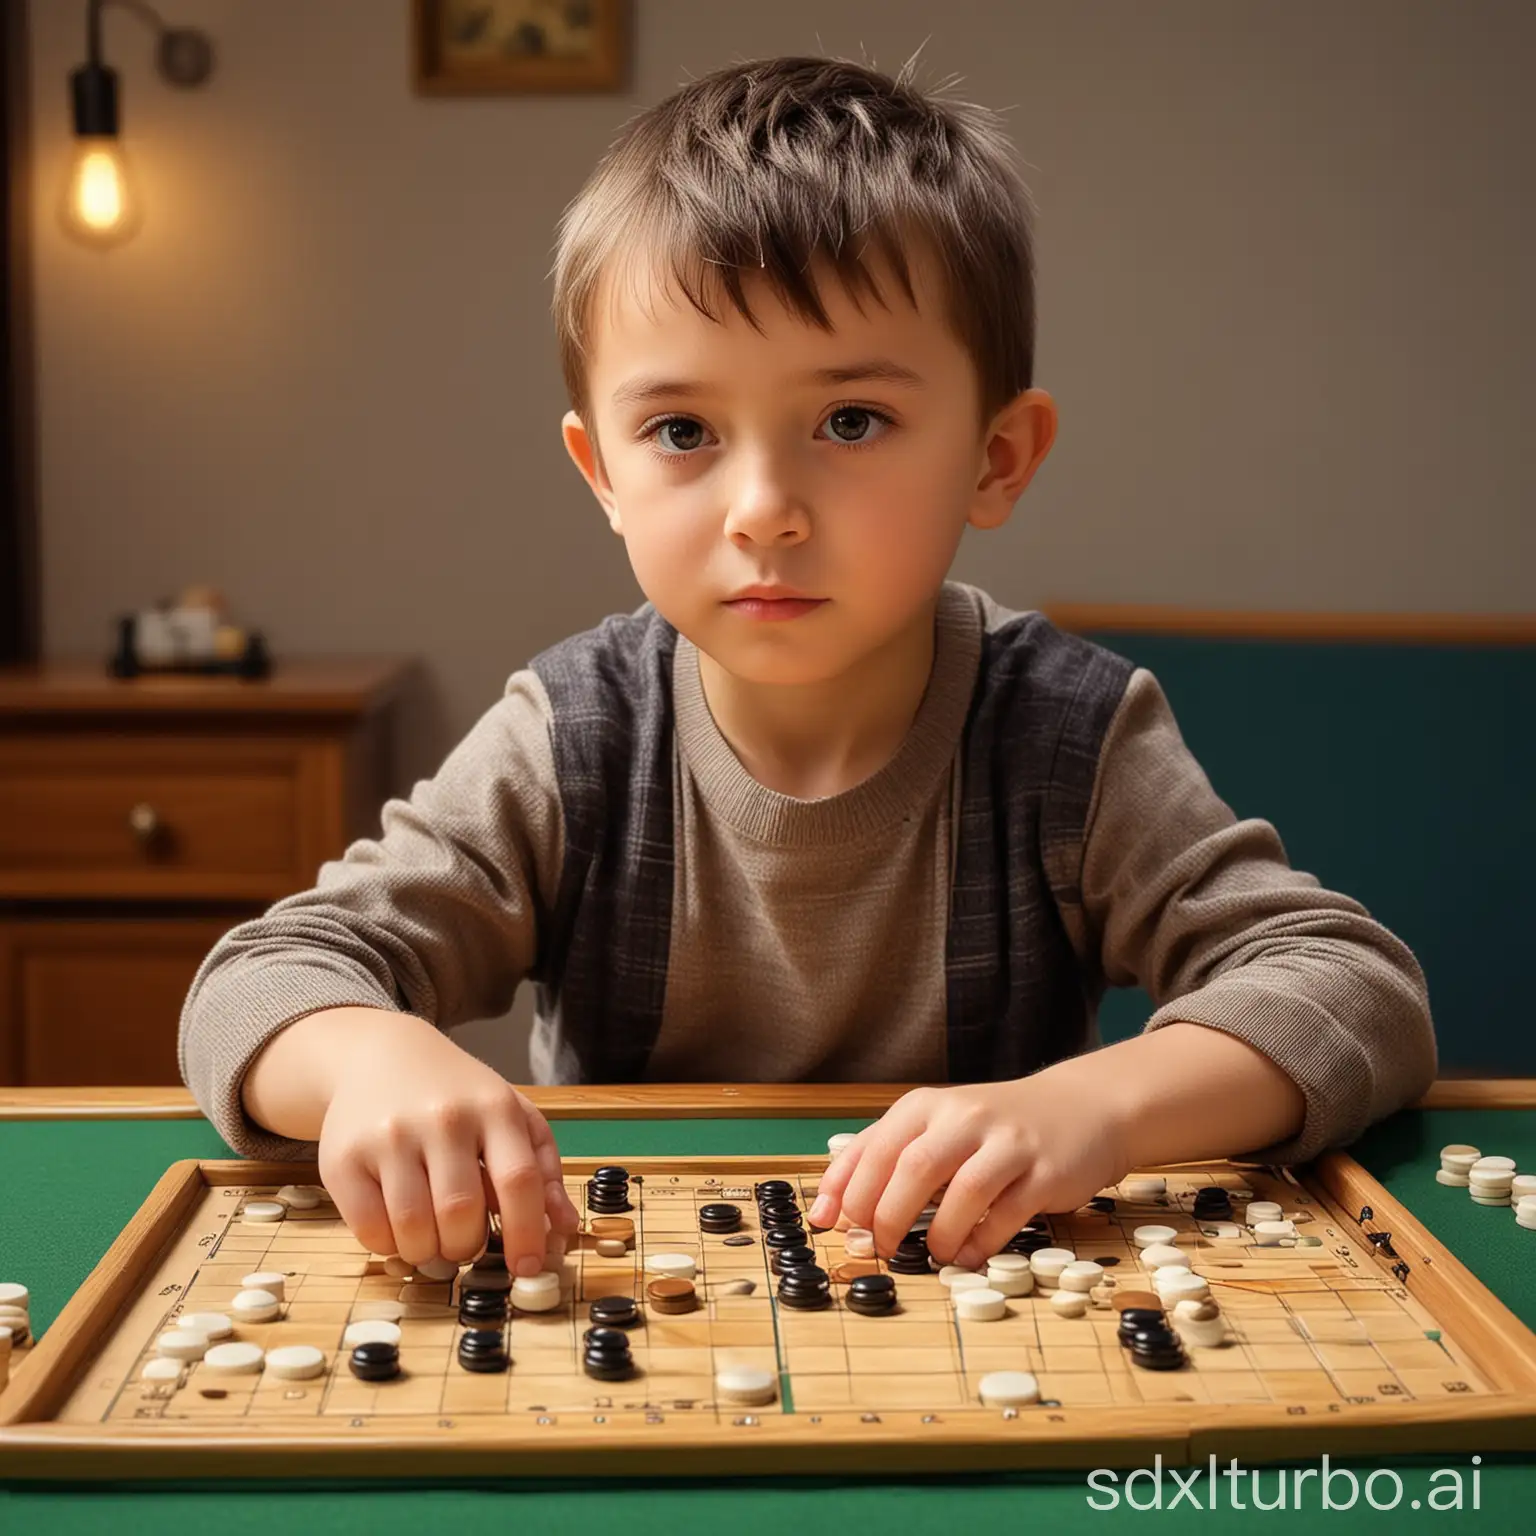 Adorable-7YearOld-Boy-Masterfully-Engaged-in-Go-Game-8K-Ultra-HD-Artwork